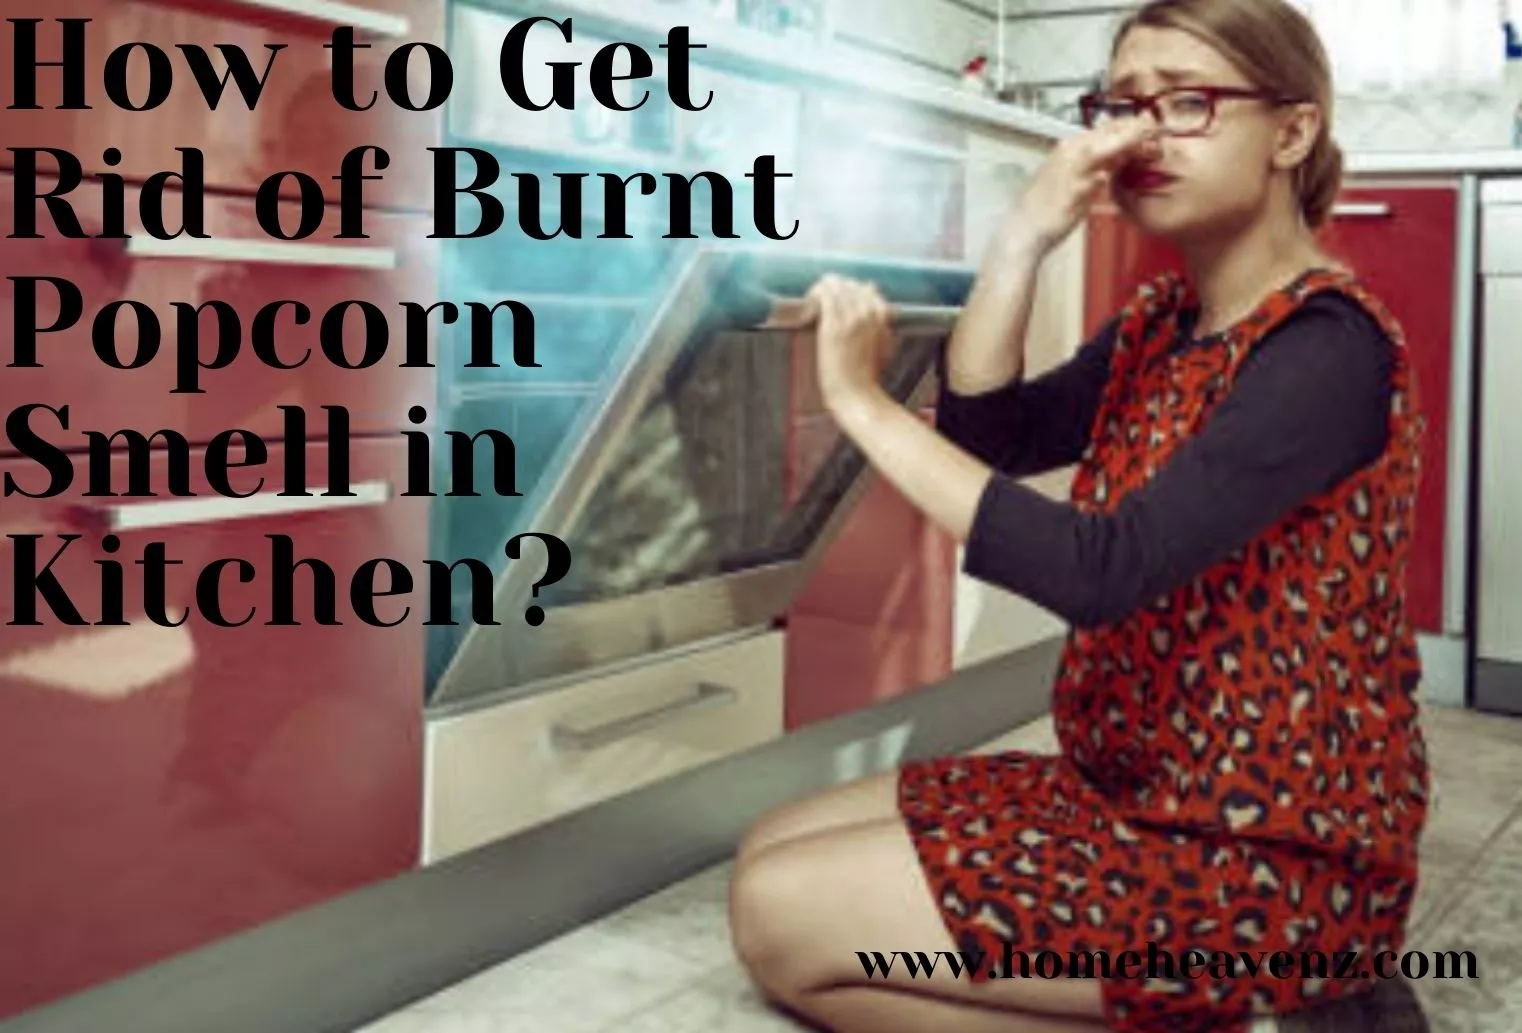 How to Get Rid of Burnt Popcorn Smell in Kitchen